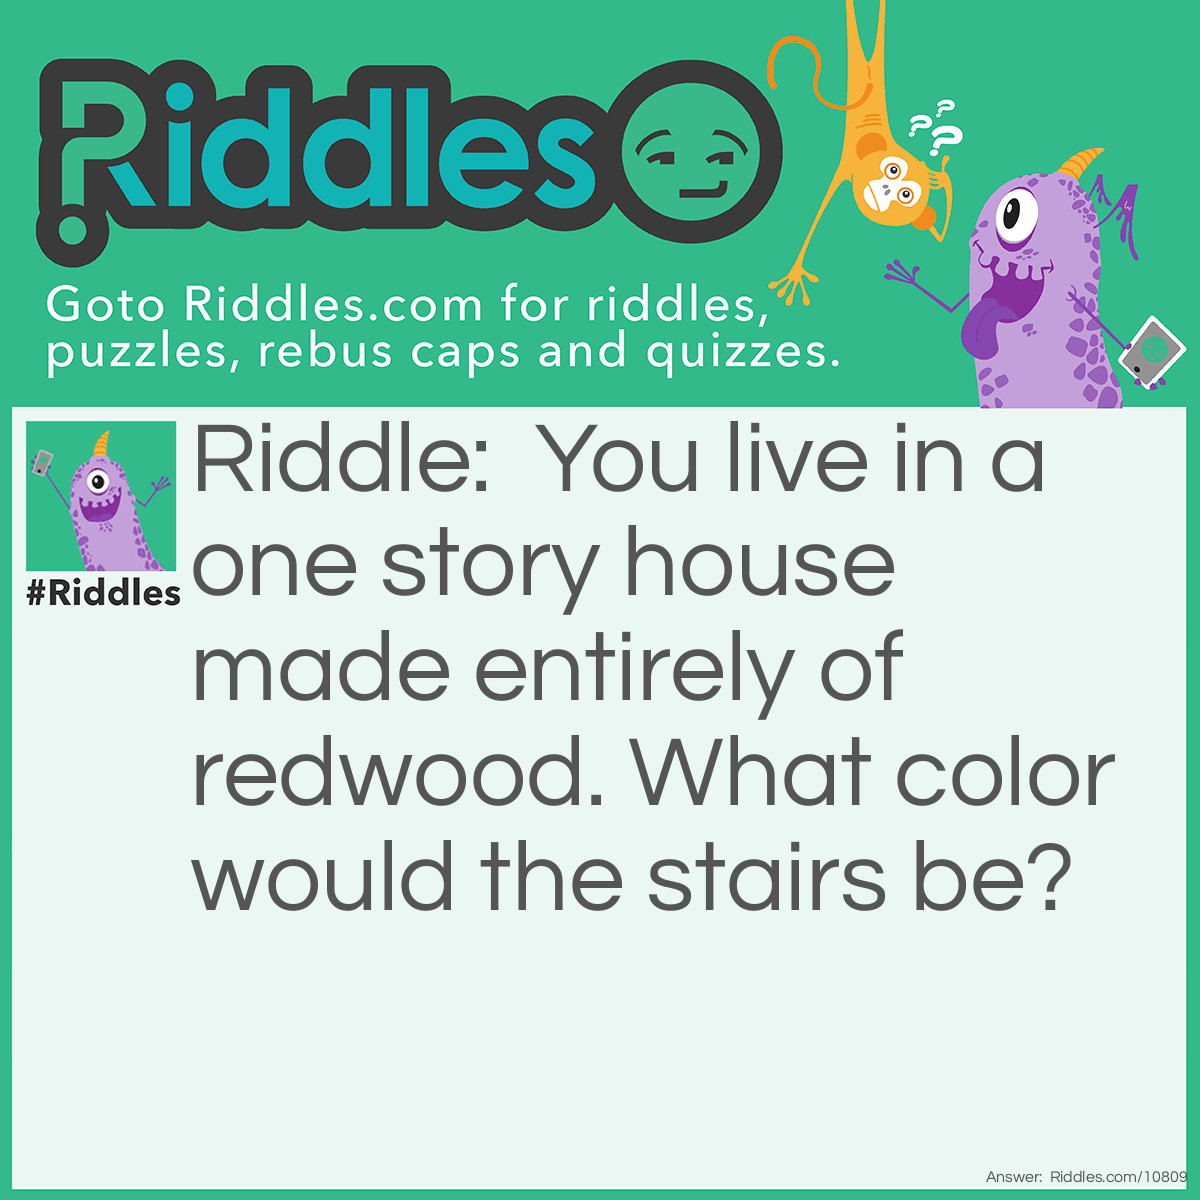 Riddle: You live in a one story house made entirely of redwood. What color would the stairs be? Answer: What stairs? You live in a one-story house.